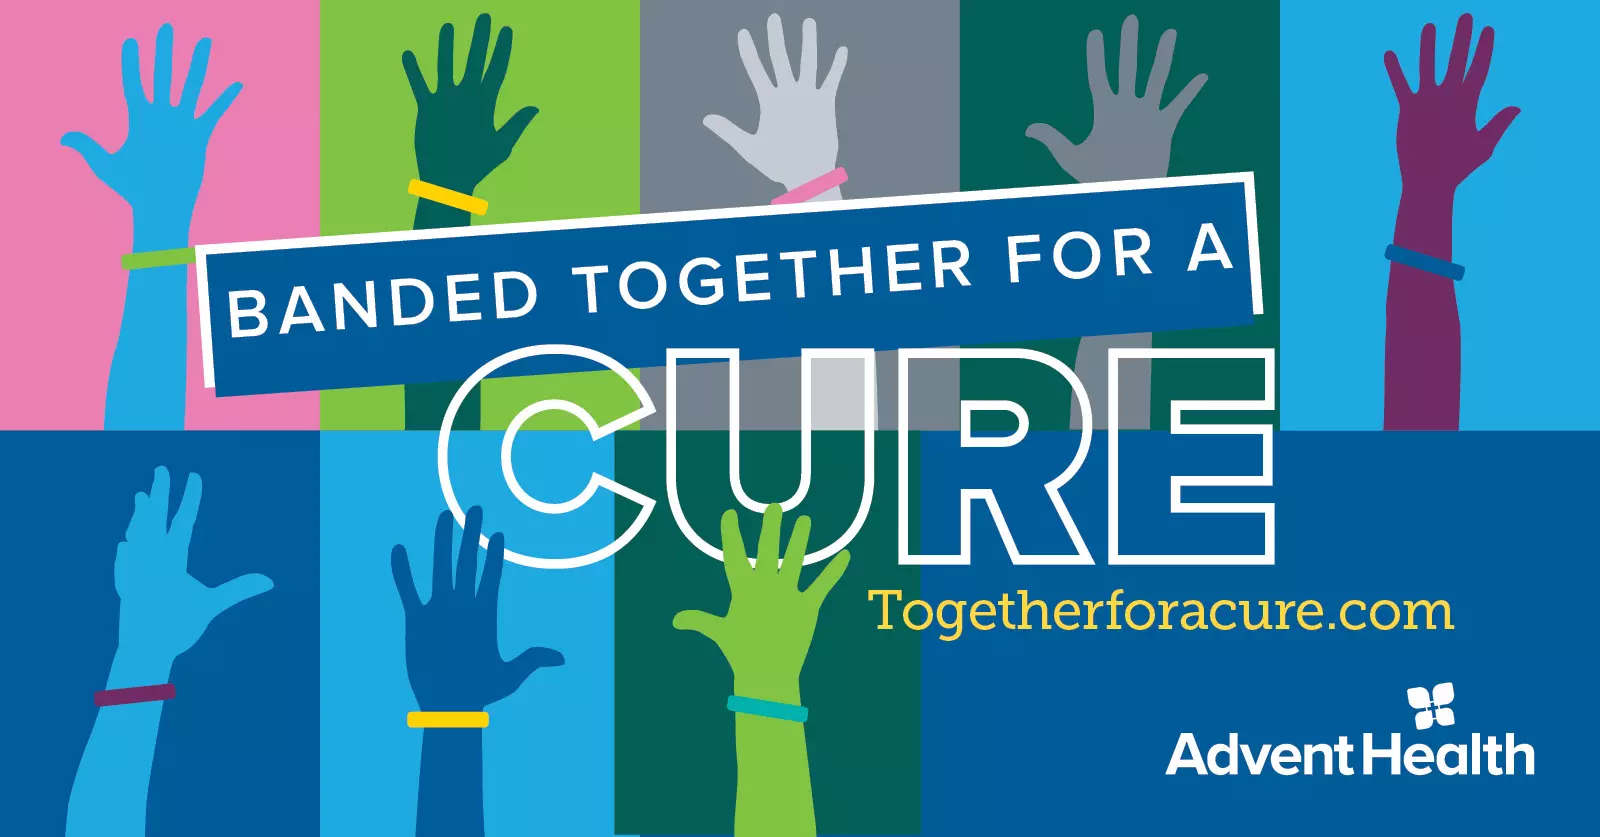 hands raised Together for a cure campaign image